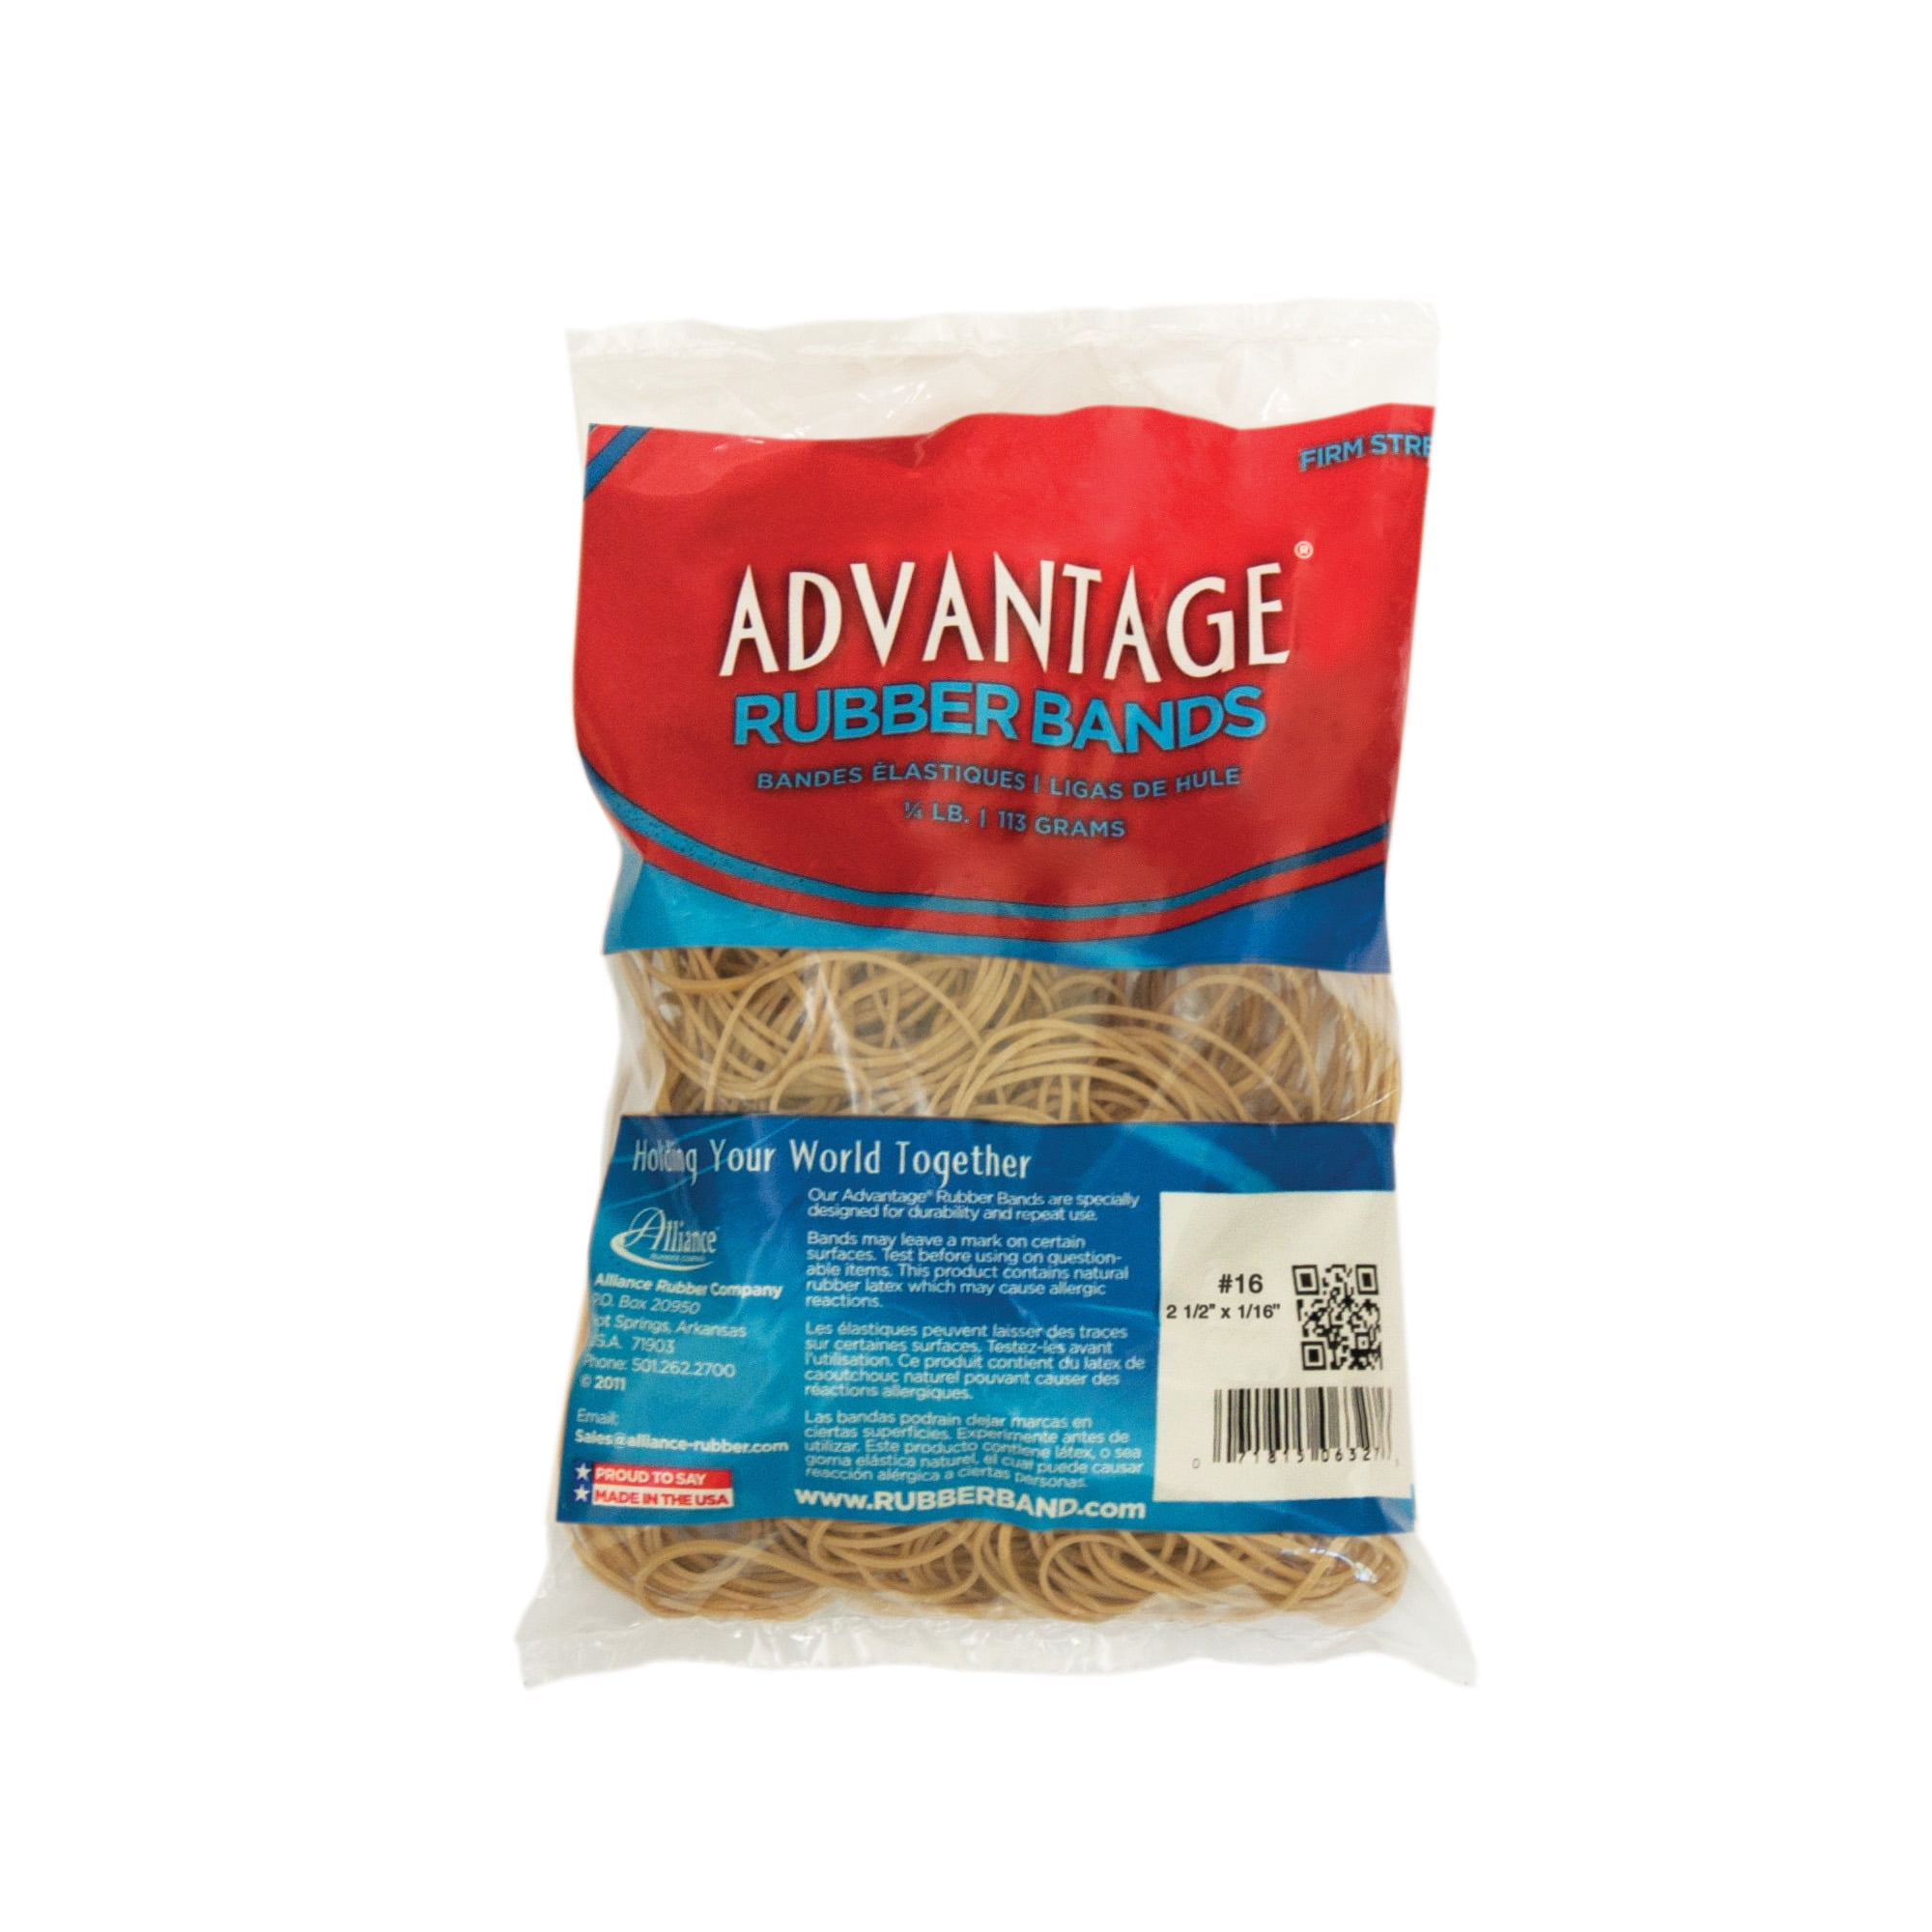 9 Bags Alliance 26131 Rubber Bands Natural 2 Oz Bag Assorted Sizes for sale online